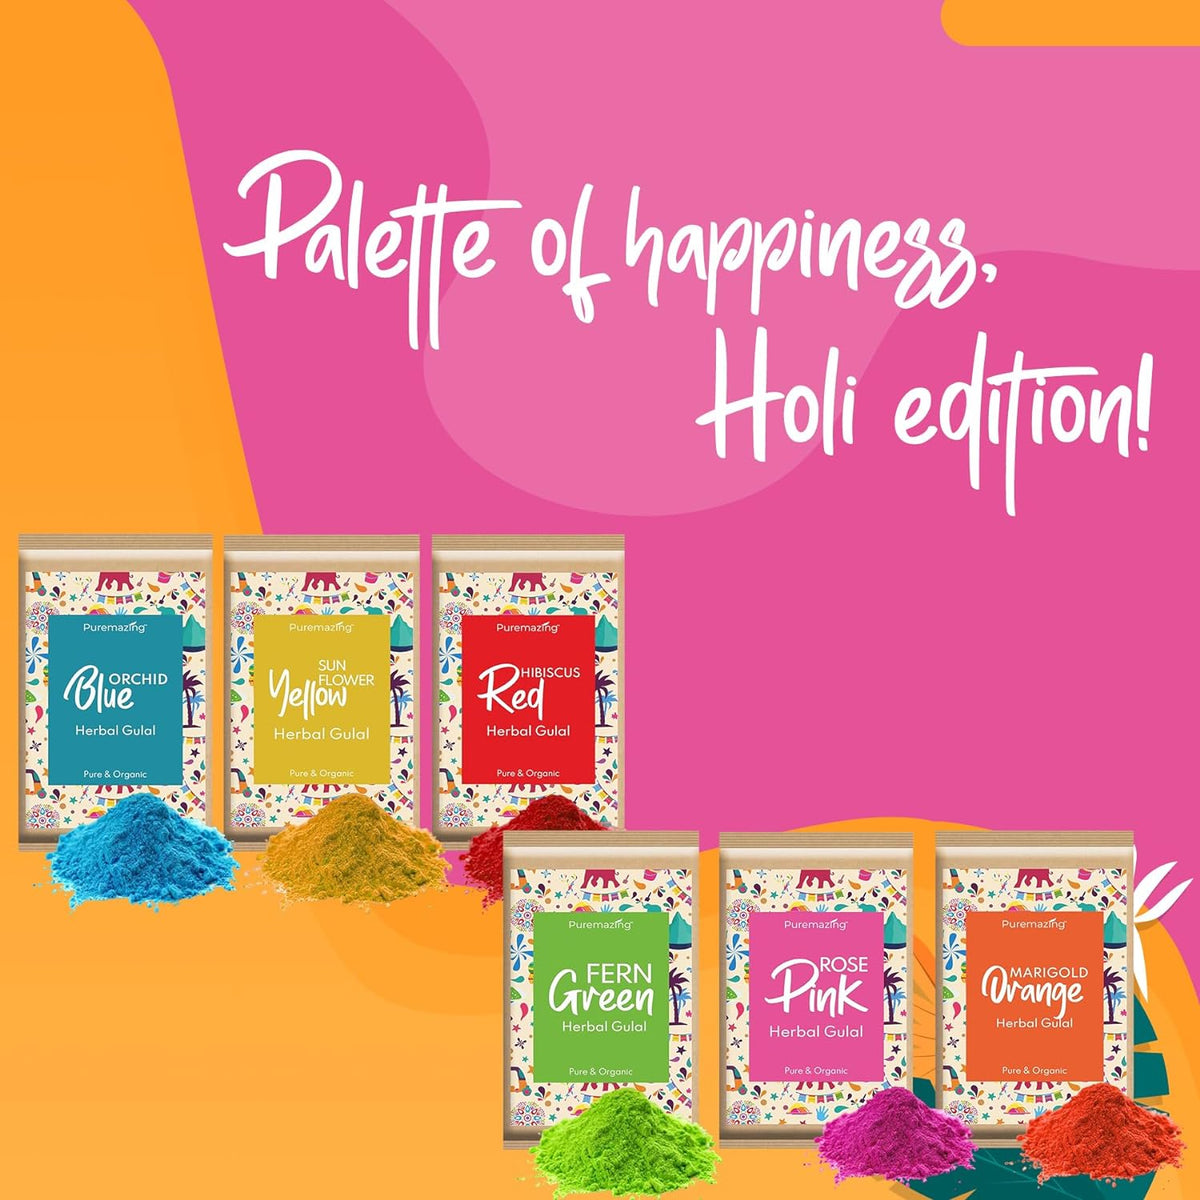 Puremazing by Imvelo Holi Colors Bags | 100% Natural | Herbal Gulal | Gift Set